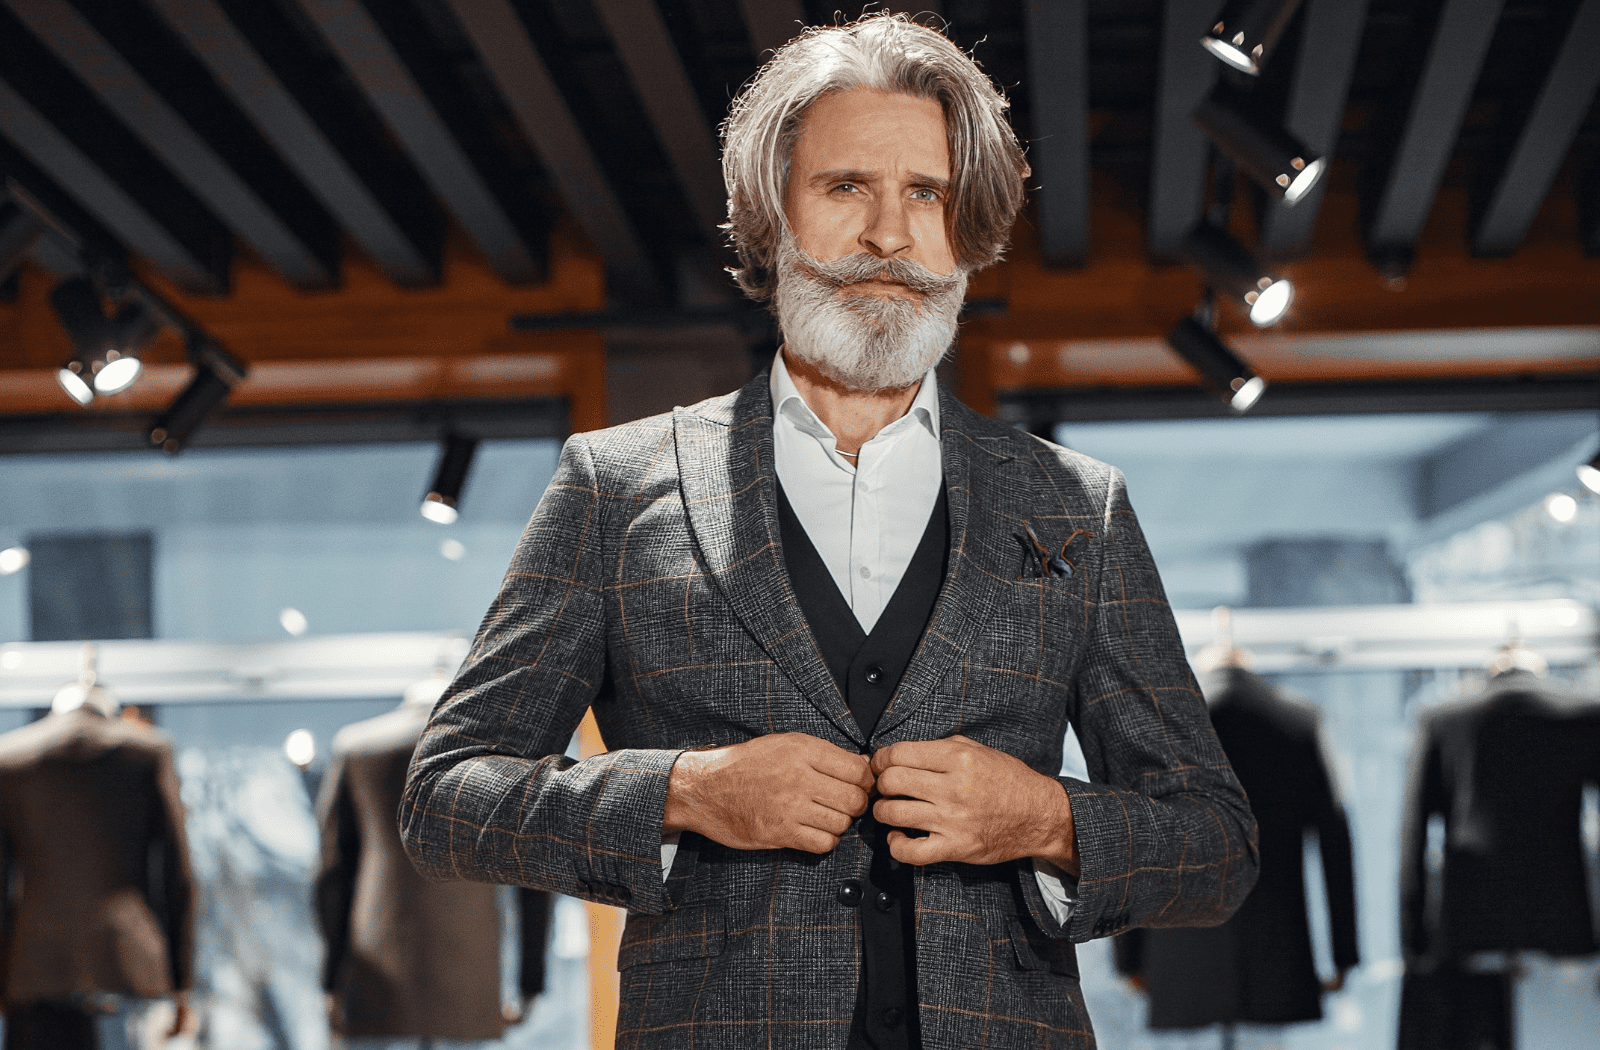 10 Best Places to Buy Affordable Suits Online - The GentleManual